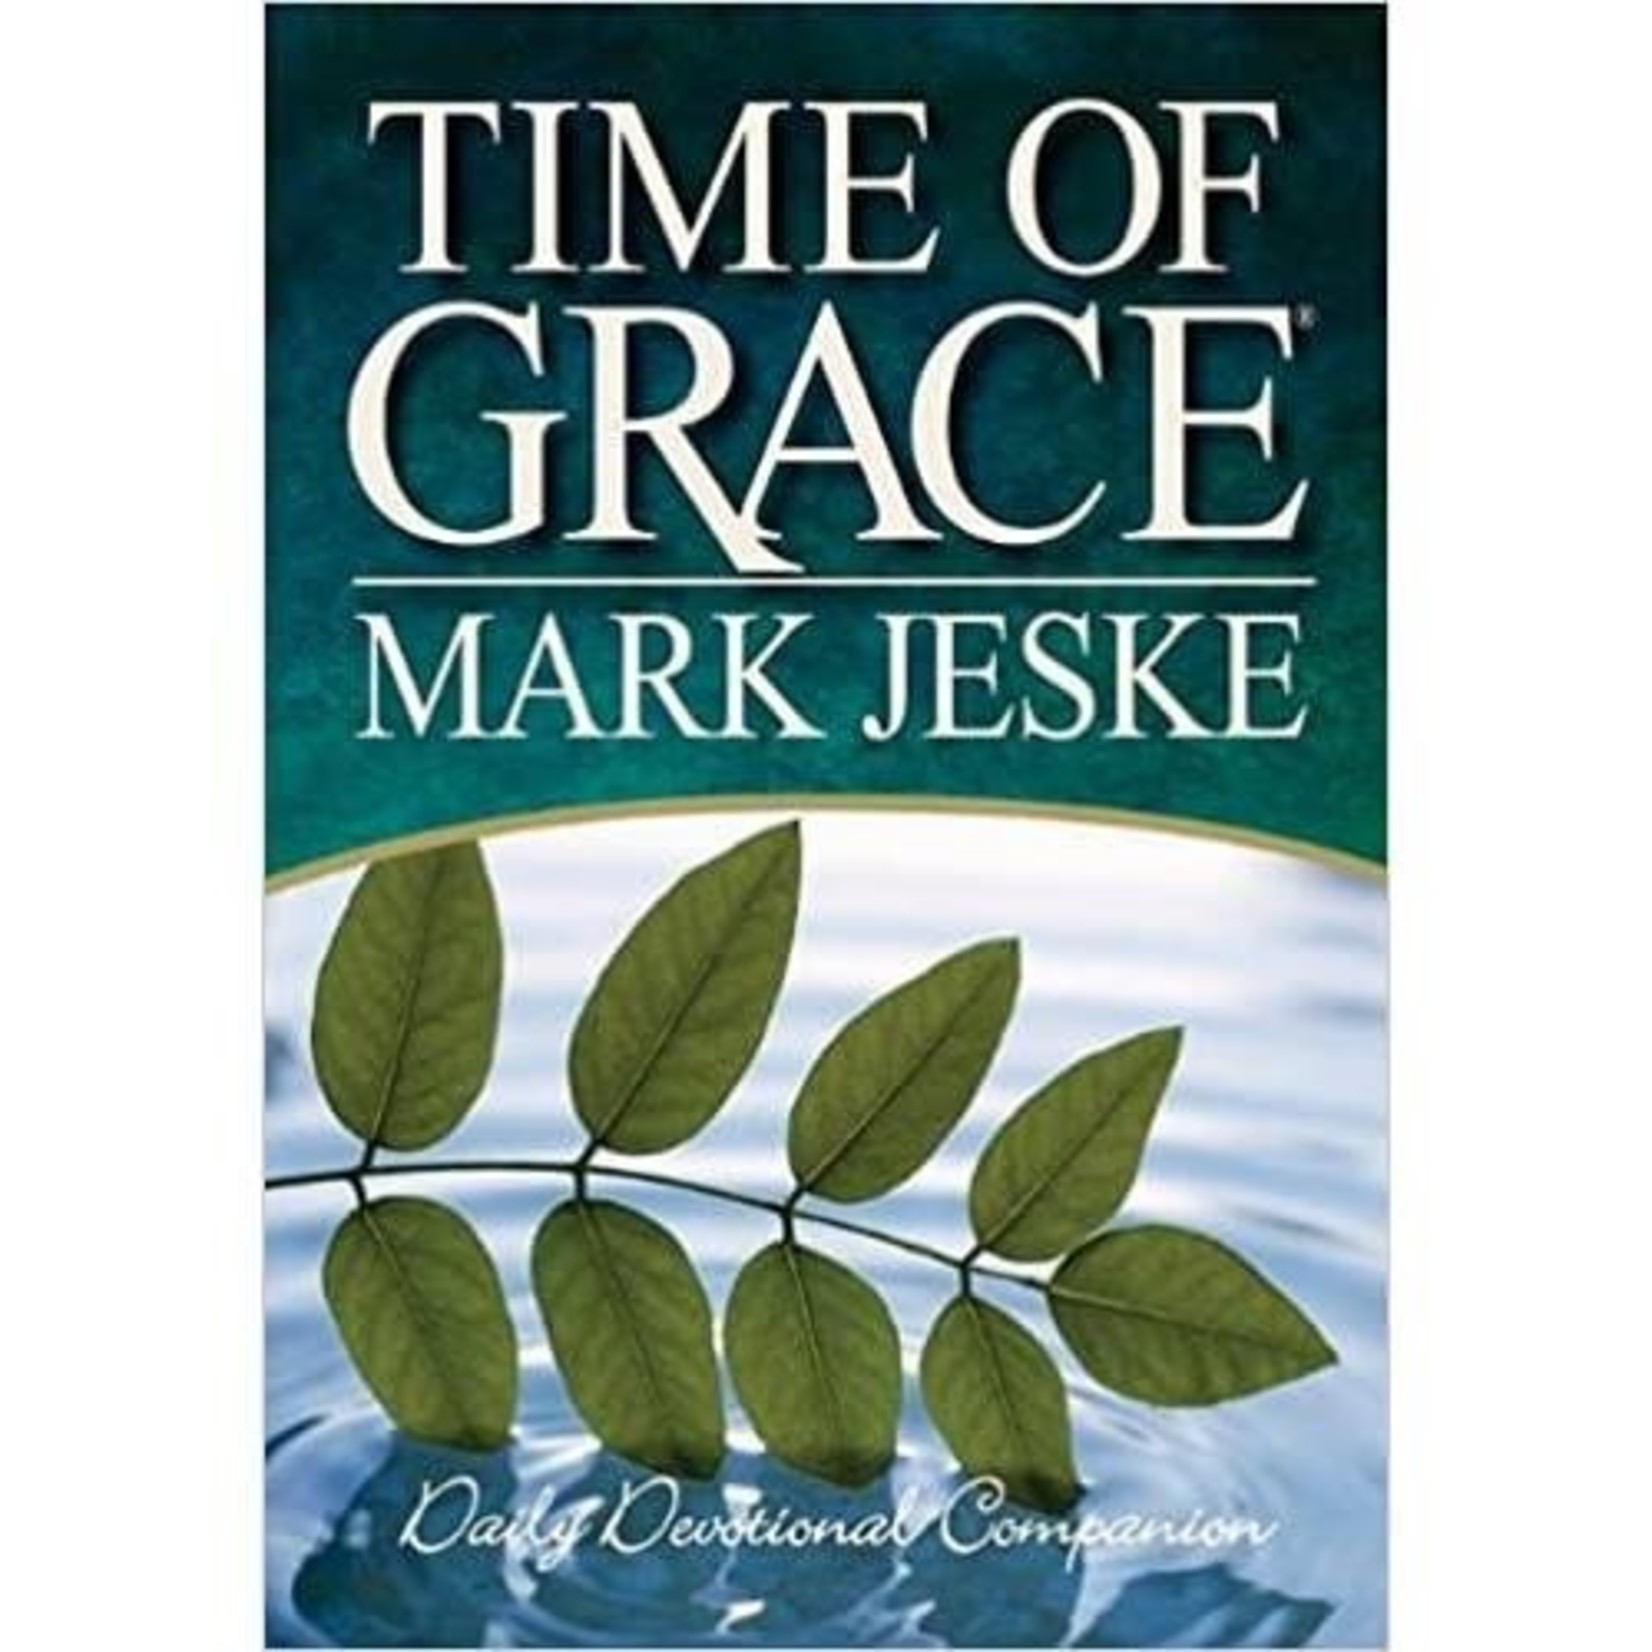 Time of Grace: Daily Devotional Companion